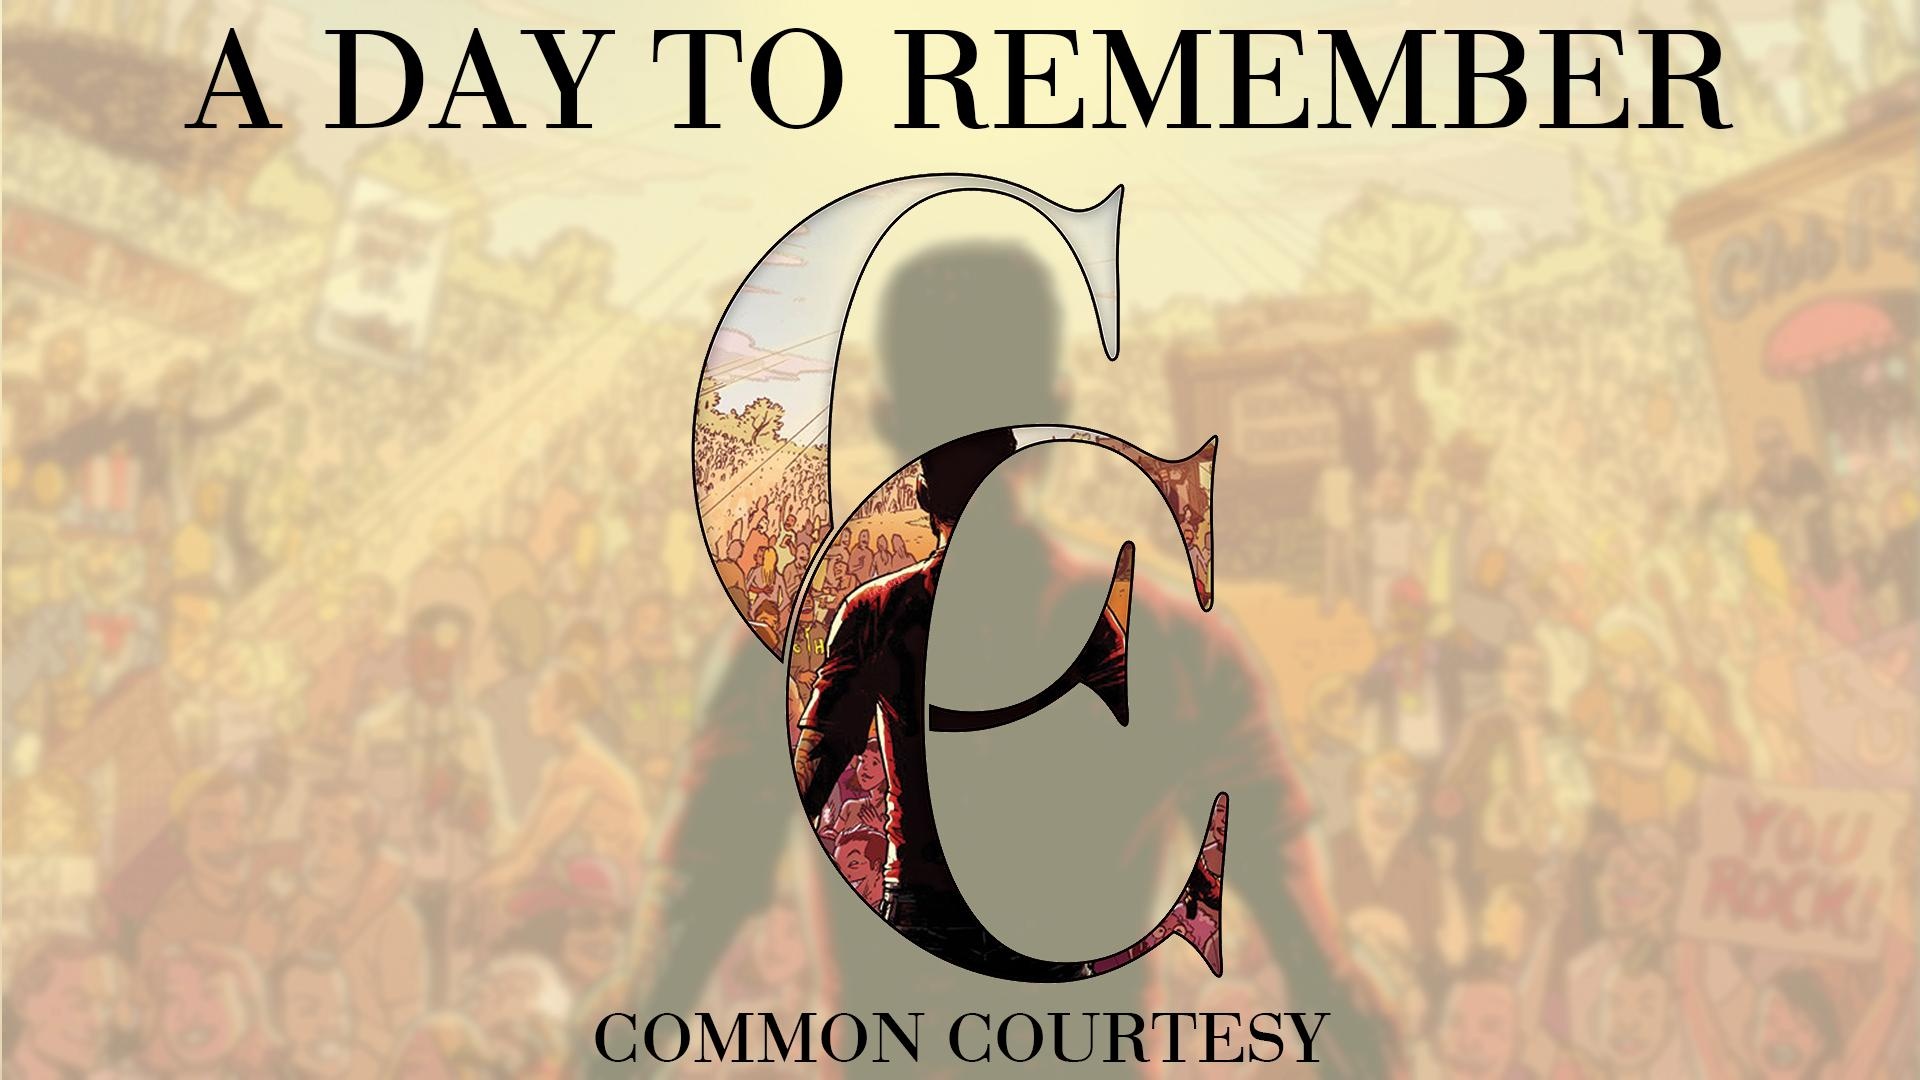 A Day to Remember, Quotes about common courtesy, Deep lyrics impact, 1920x1080 Full HD Desktop